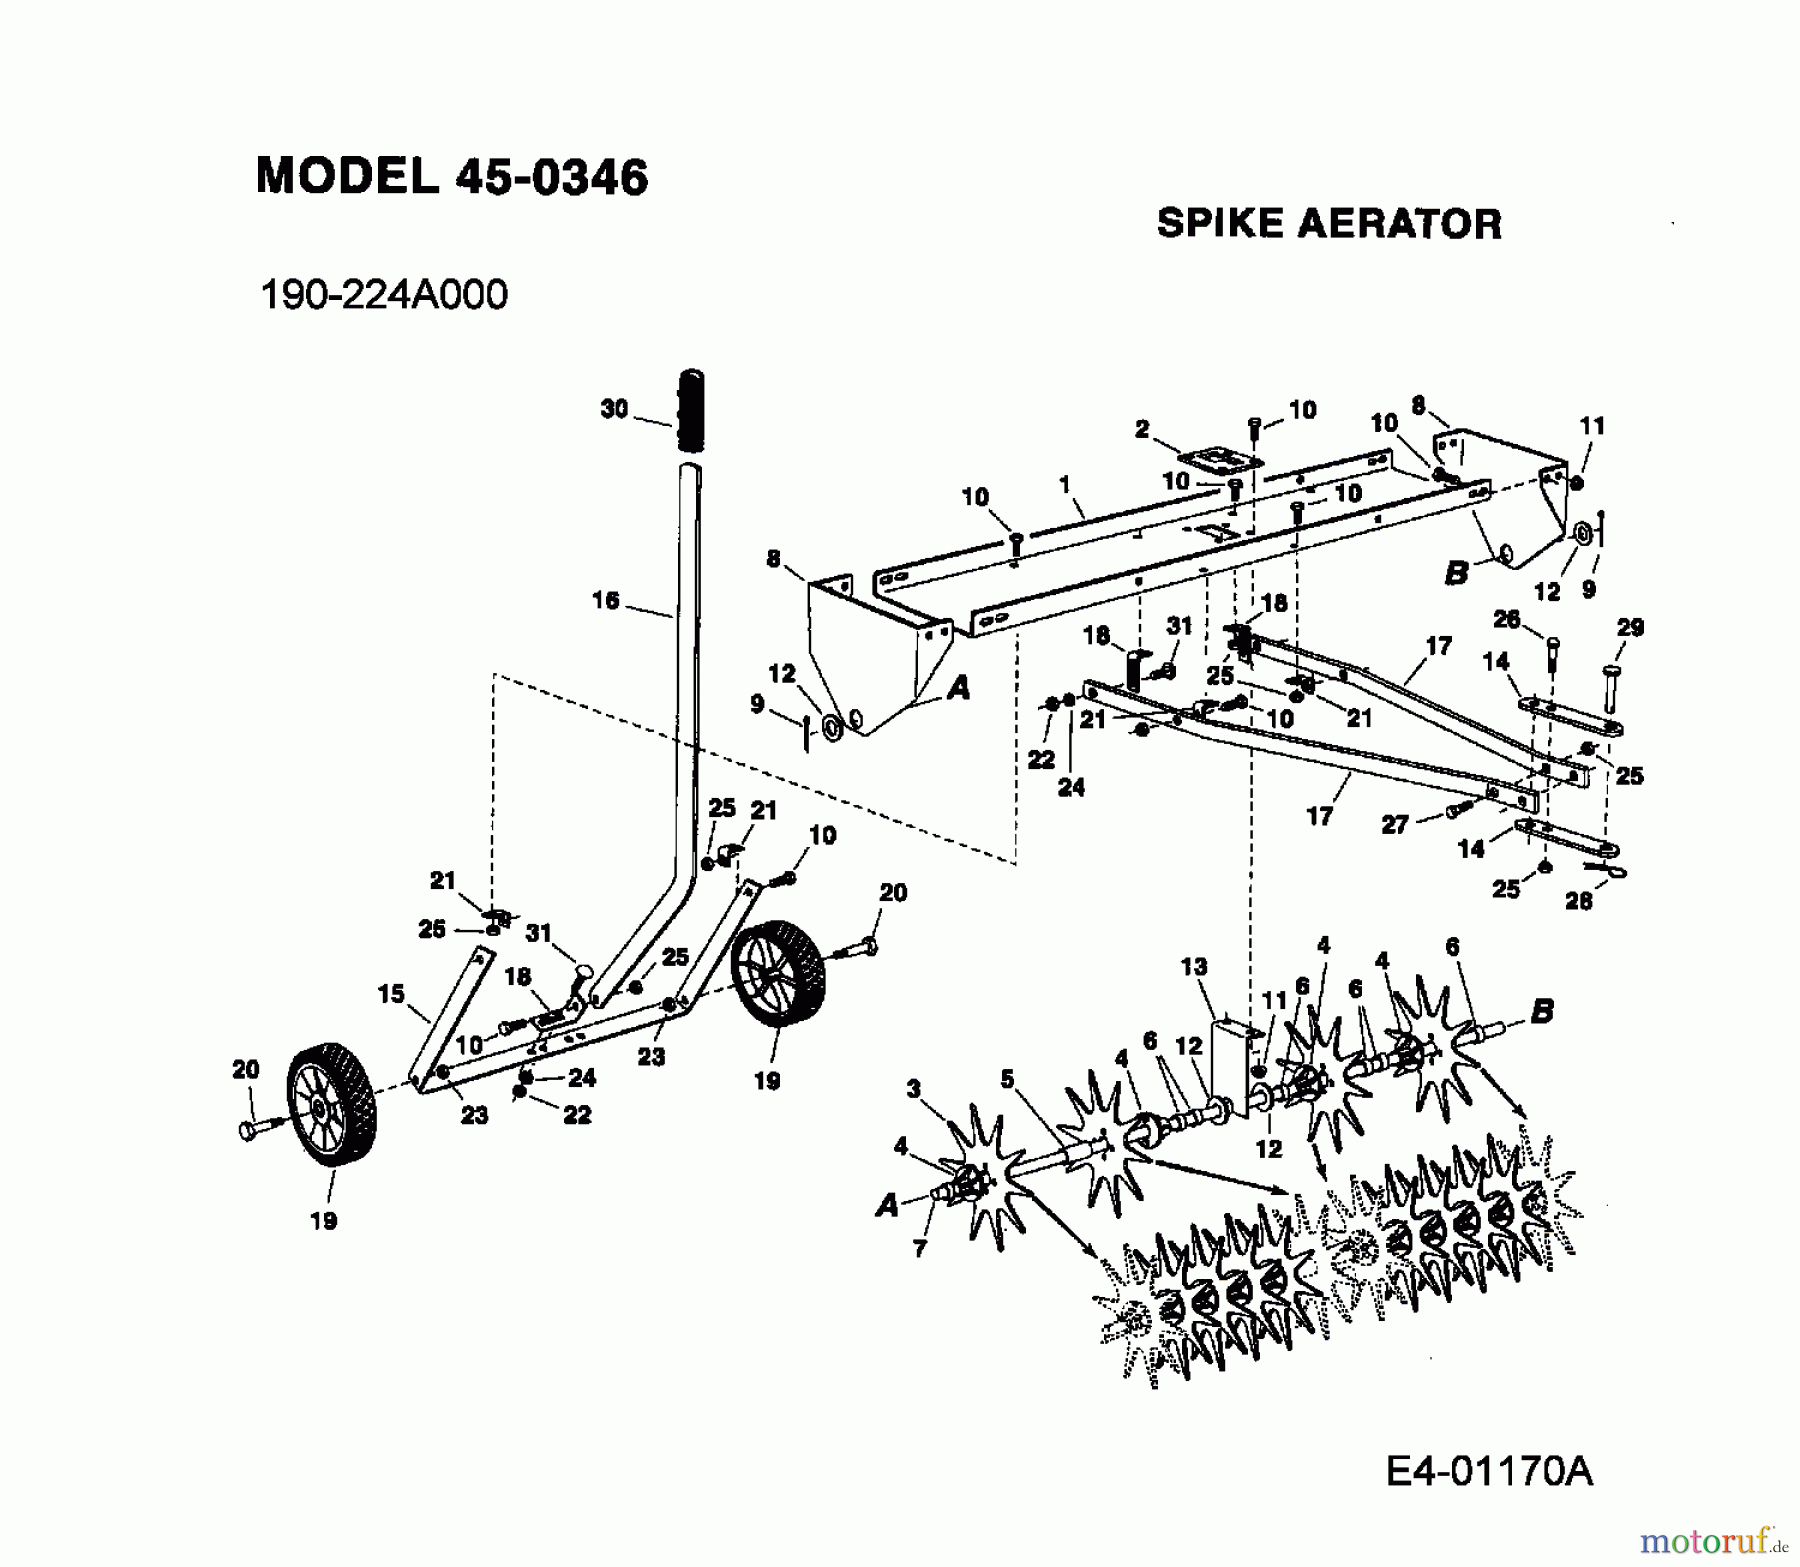  MTD Accessories Accessories garden and lawn tractors Groomer 45-0346  (190-224A000) 190-224A000  (2014) Basic machine